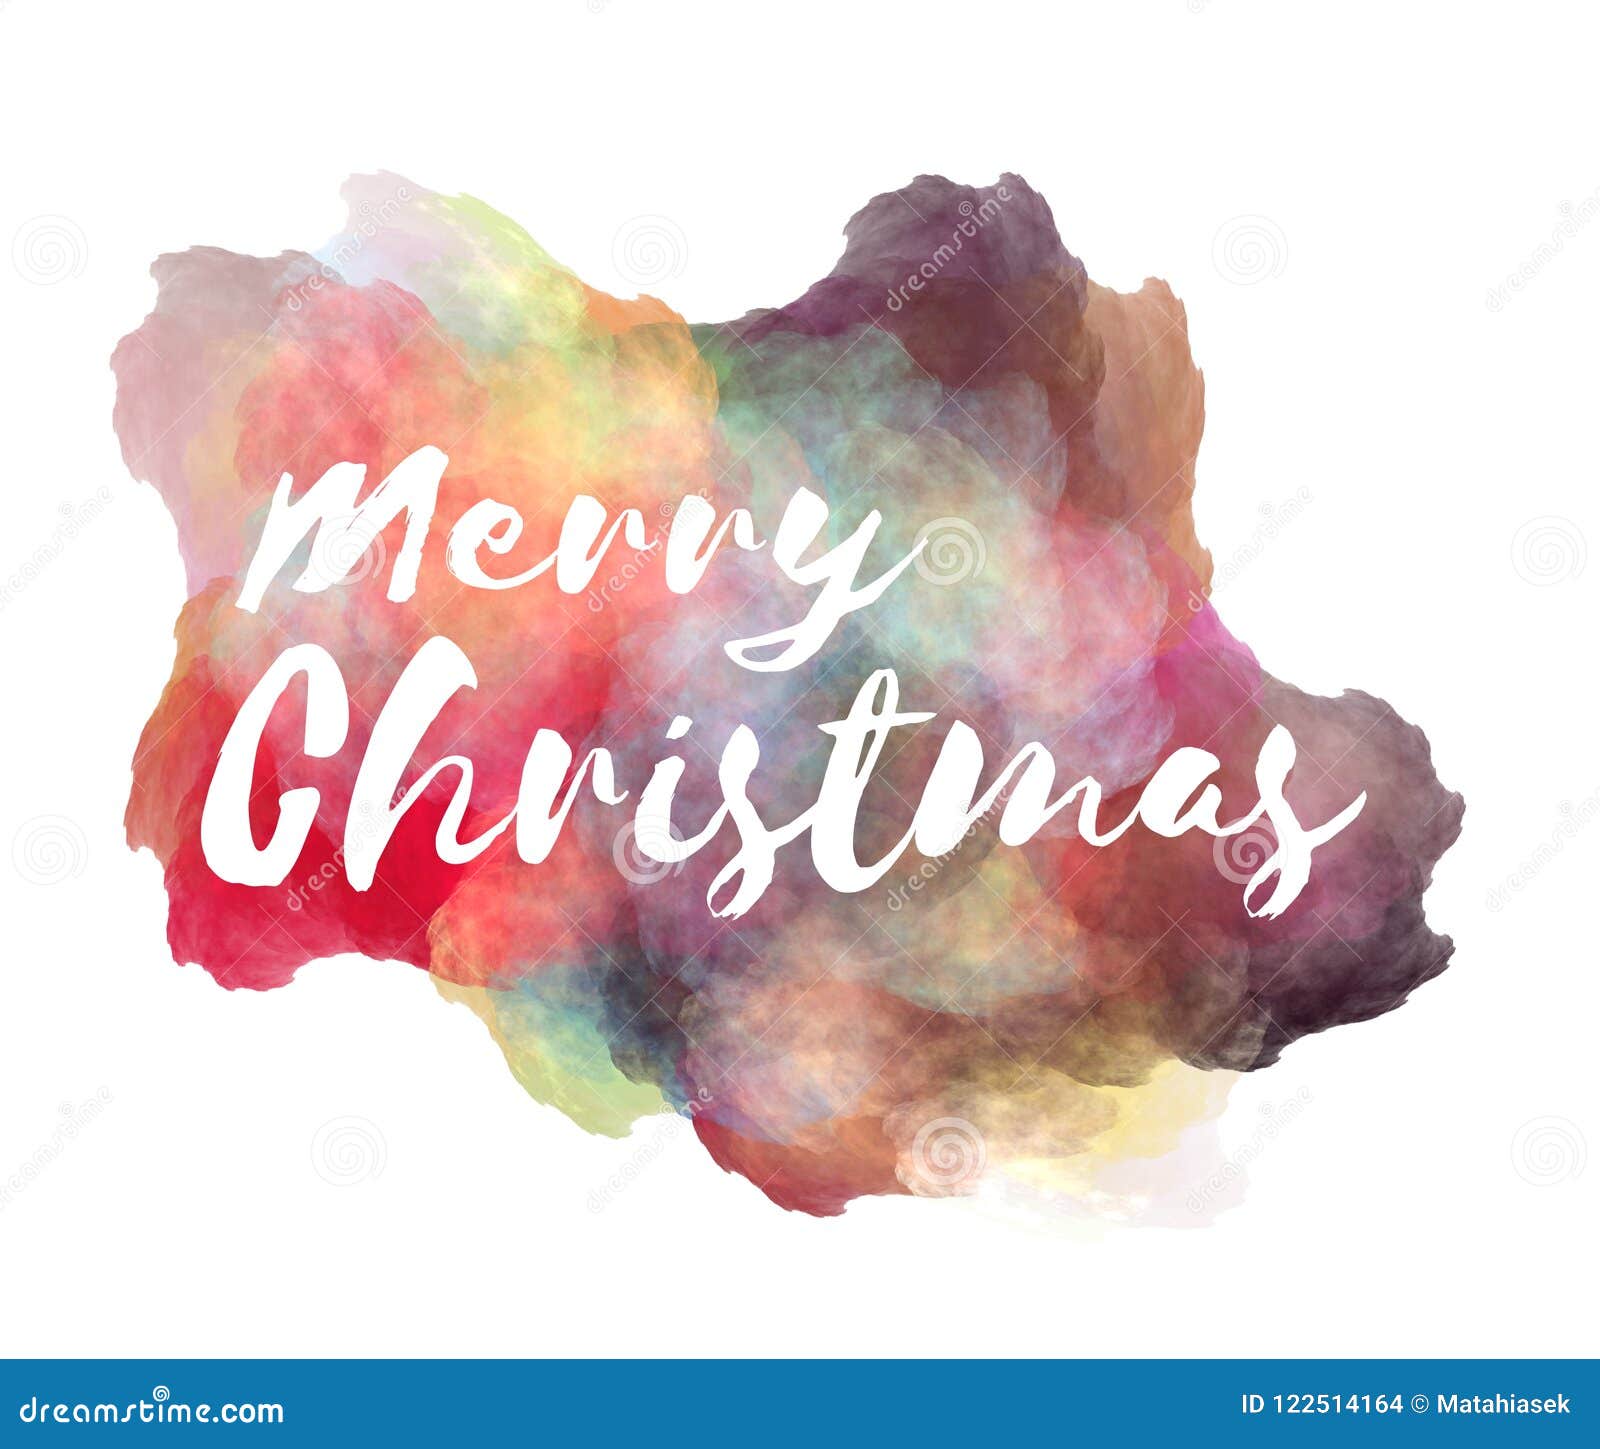 Merry Christmas hand lettering phrase on watercolor imitation color splash over white background